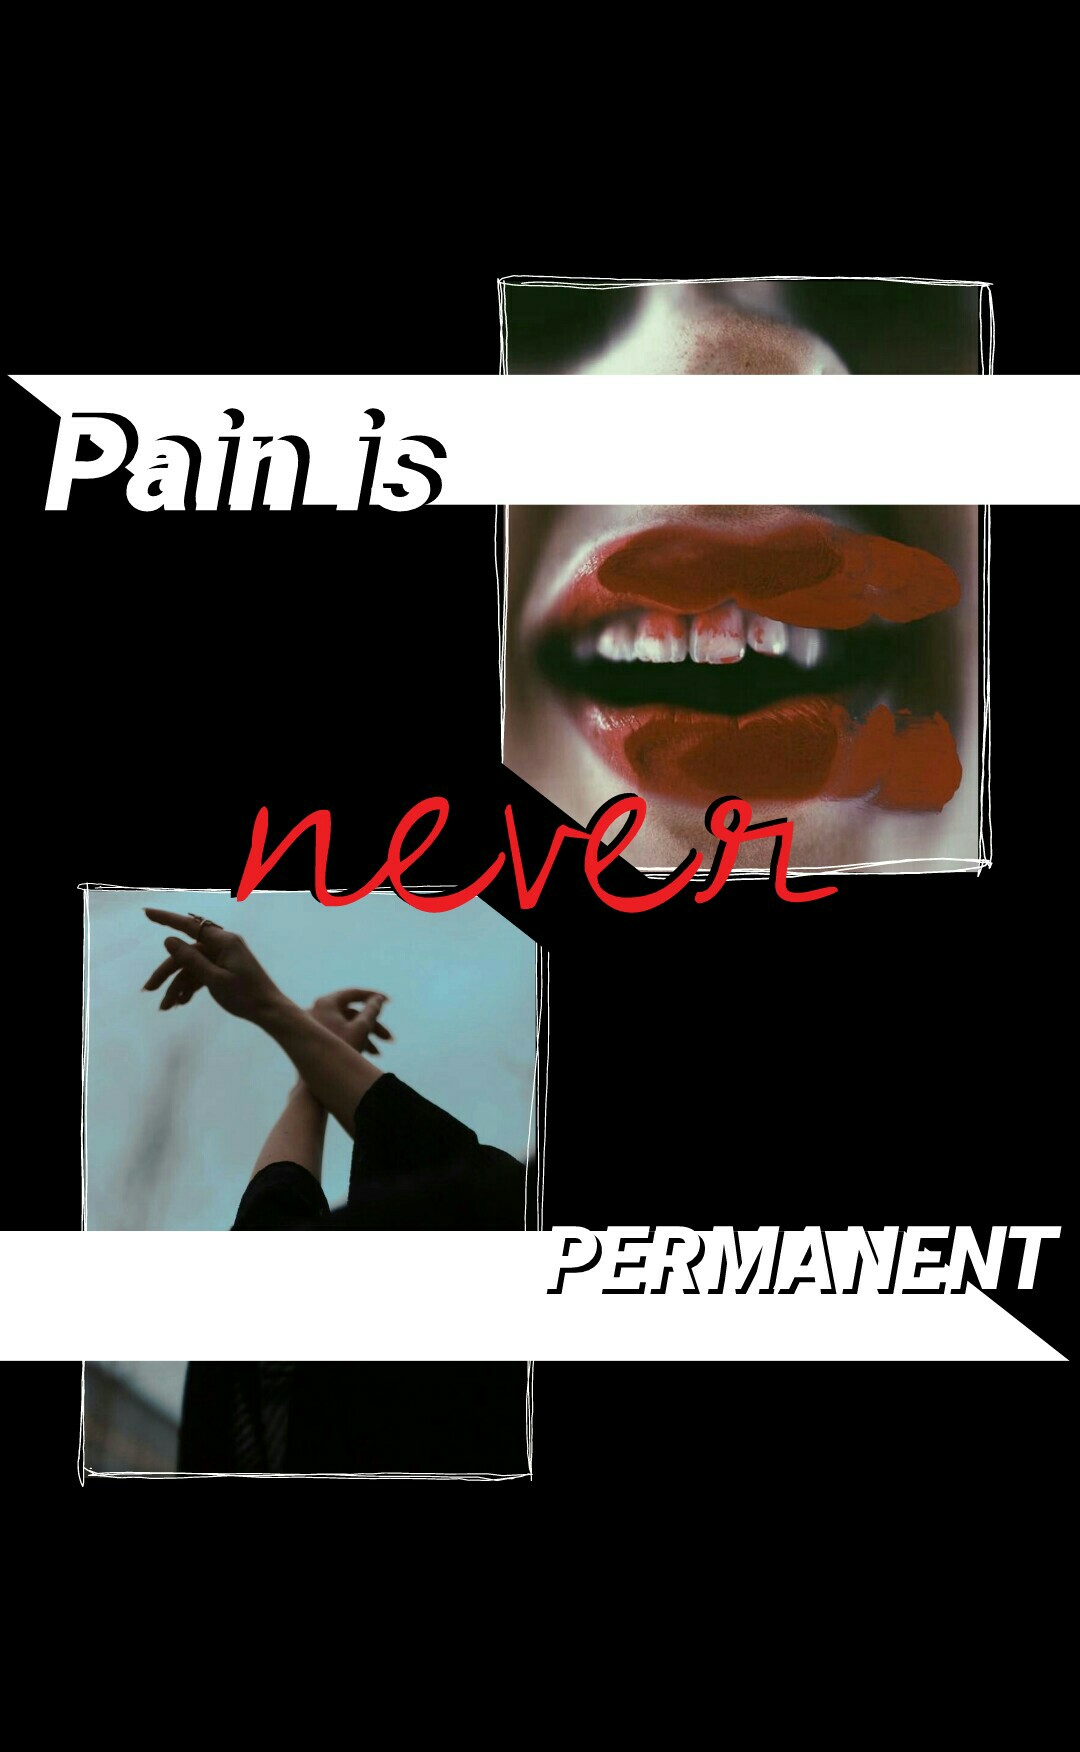 pain is never permanent